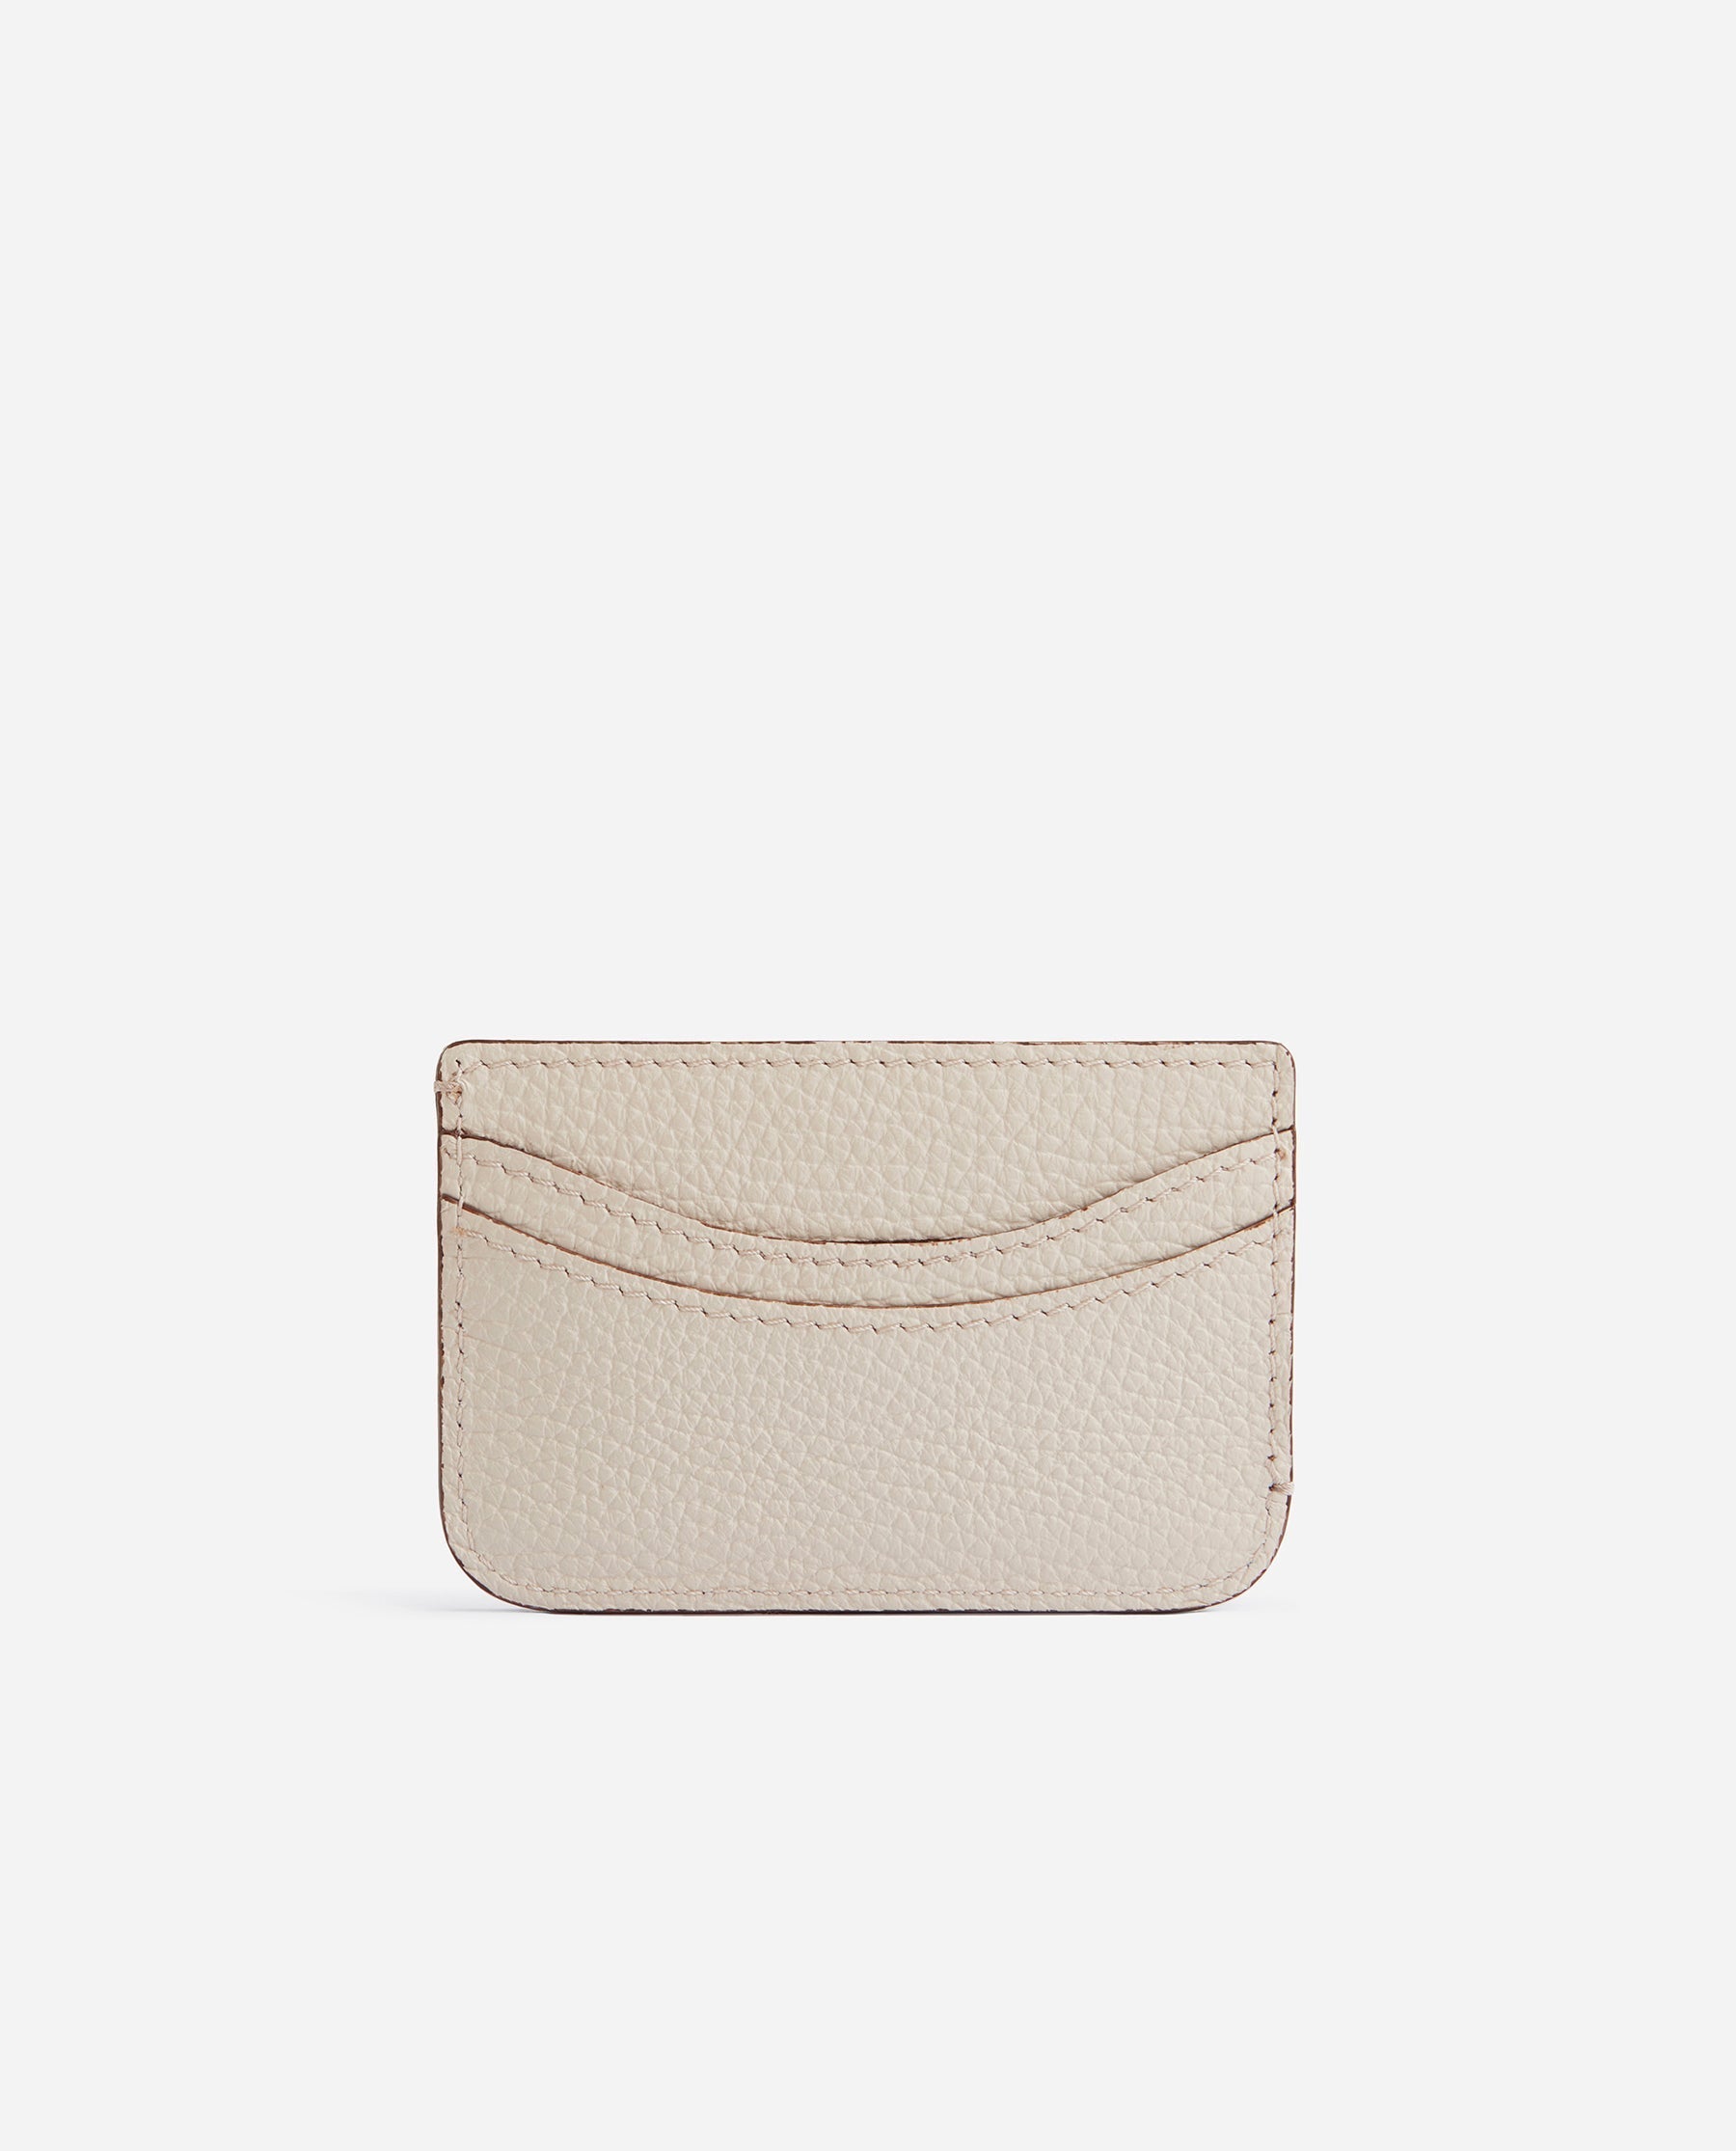 Flattered-OUTLET-SALE-Bonnie-Cardholder-Leather-Creme-Taschen-Onesize-Creme-Leather-ARCHIVE-COLLECTION.jpg